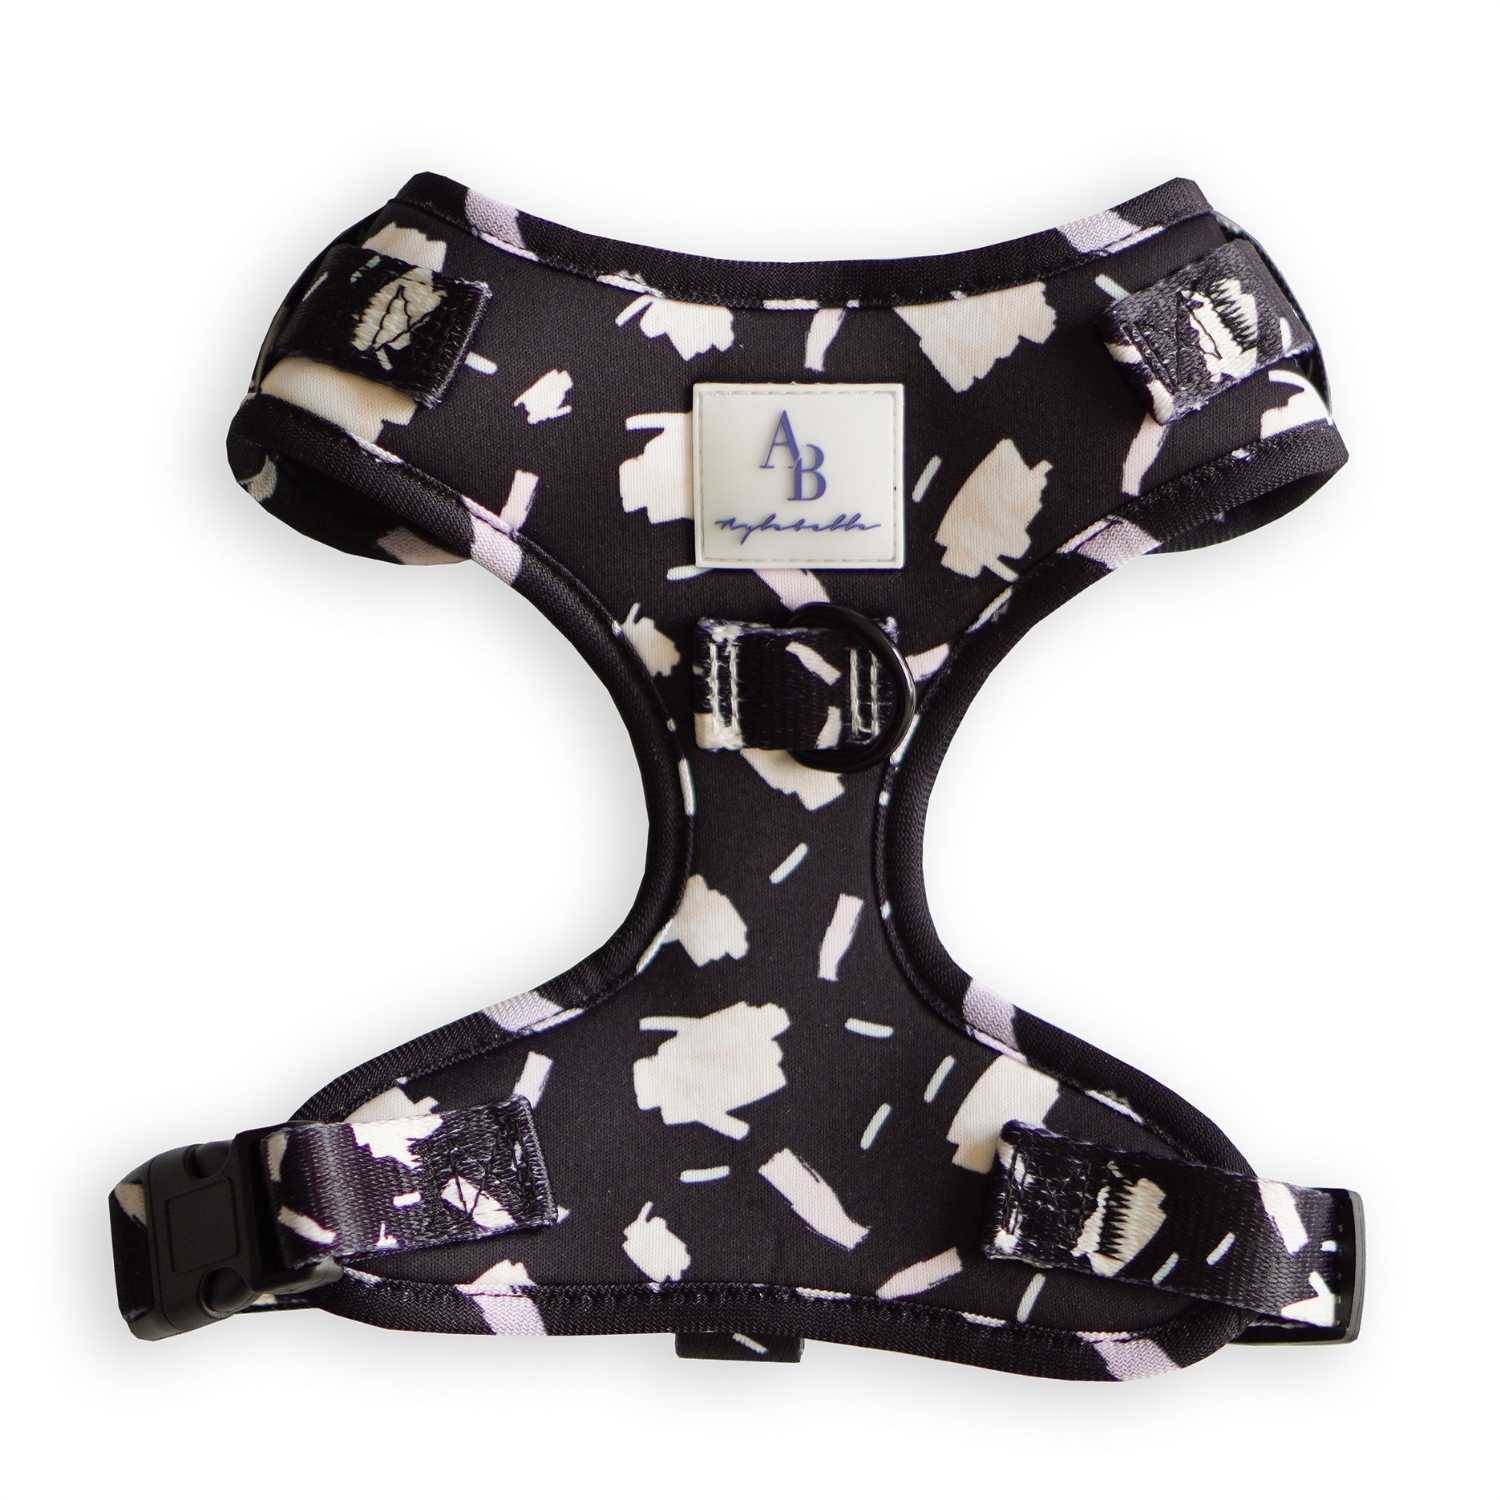 Aylabella Co. - P.S. I Love You Harness - Dog Accessories (5 Sizes)